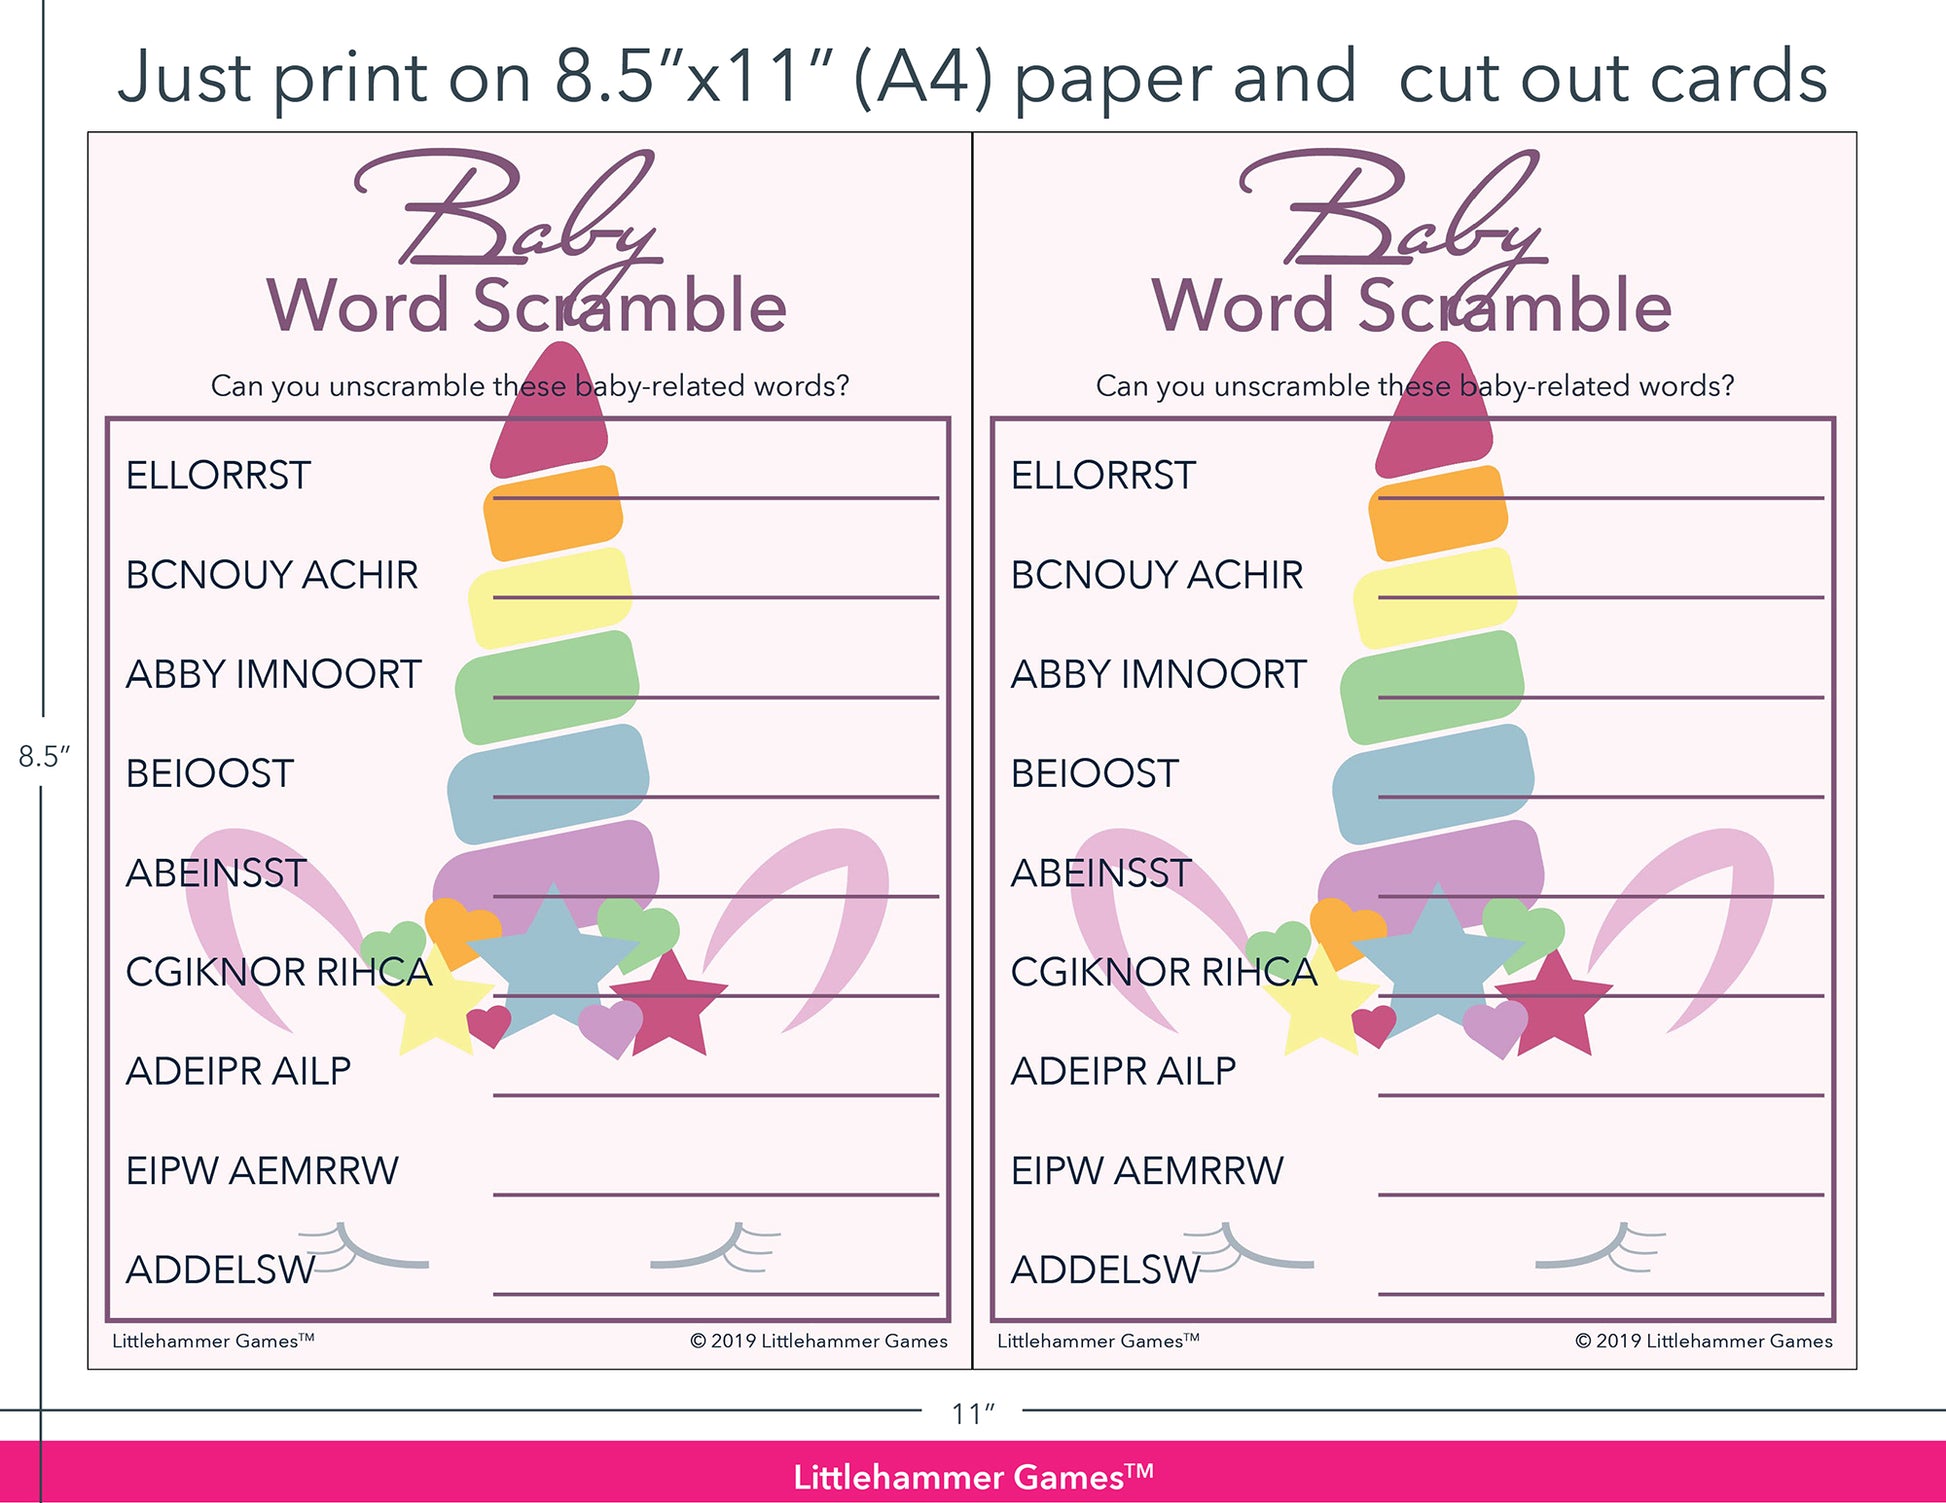 Baby Word Scramble unicorn game cards with printing instructions